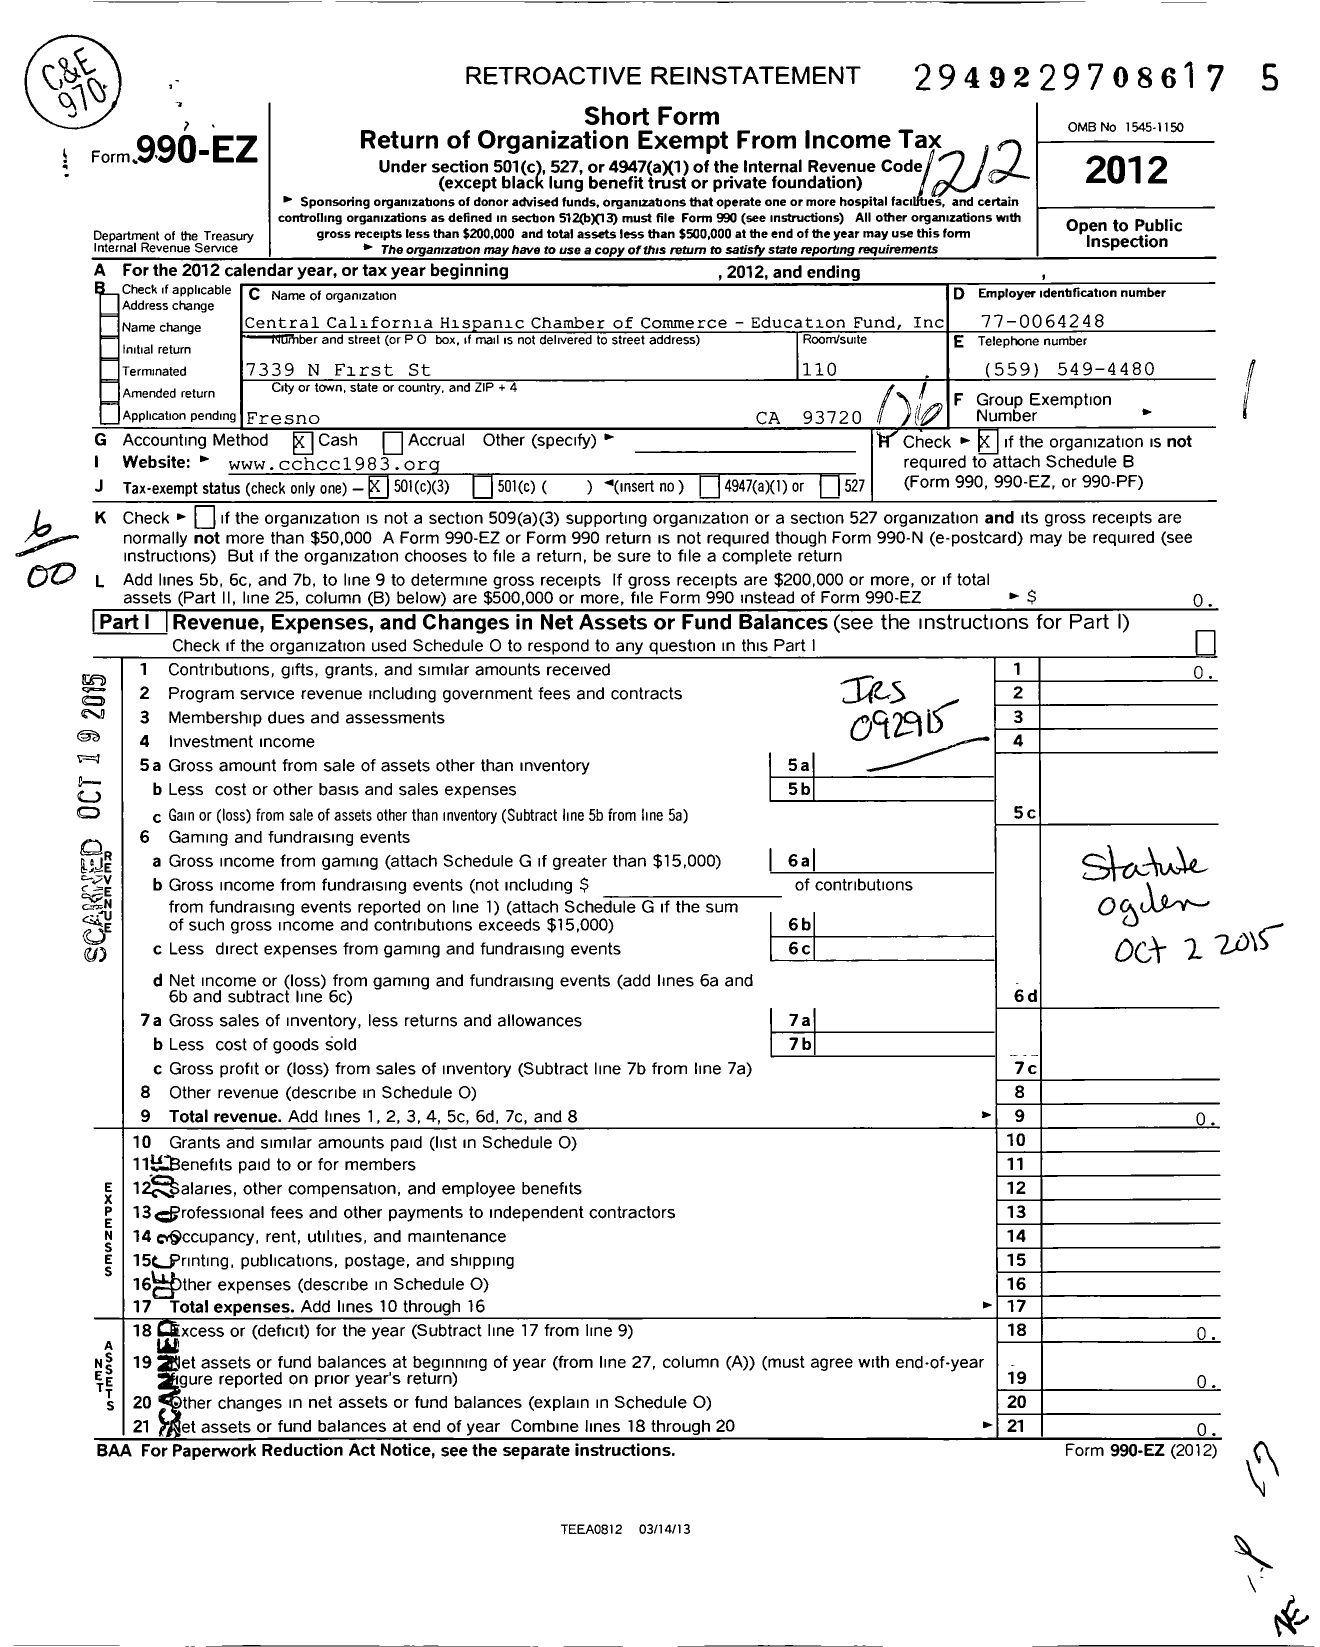 Image of first page of 2012 Form 990EZ for Central California Hispanic Chamber of Commerce